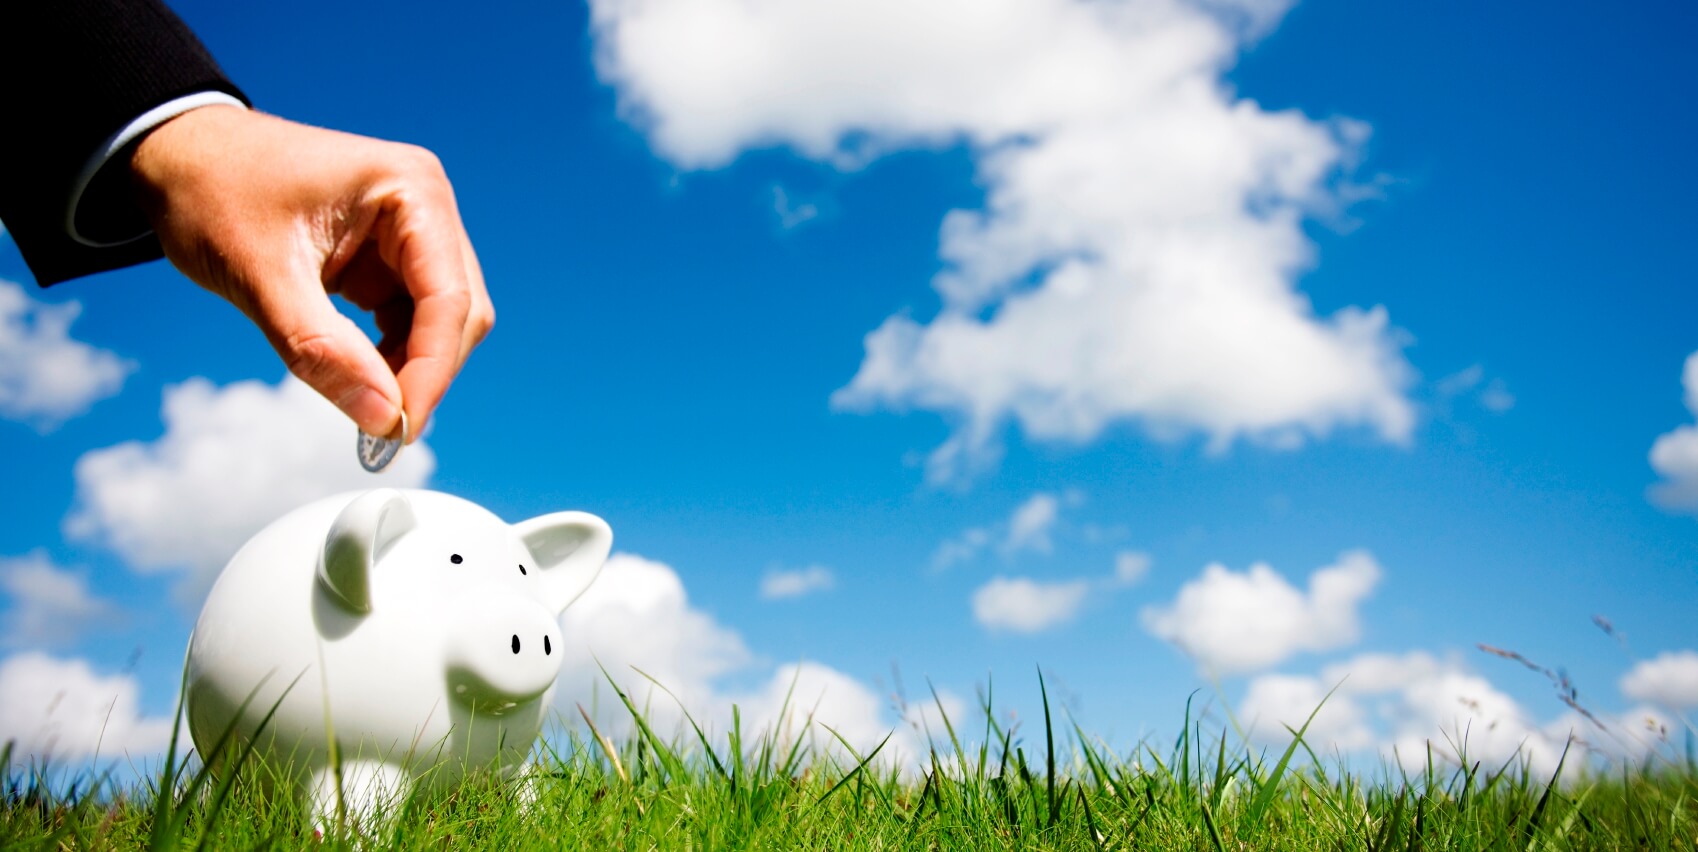 a hand shown dropping a coin into a white piggybank against a lightly clouded blue sky and sitting on fresh green grass - representing making a personal superannuation contribution